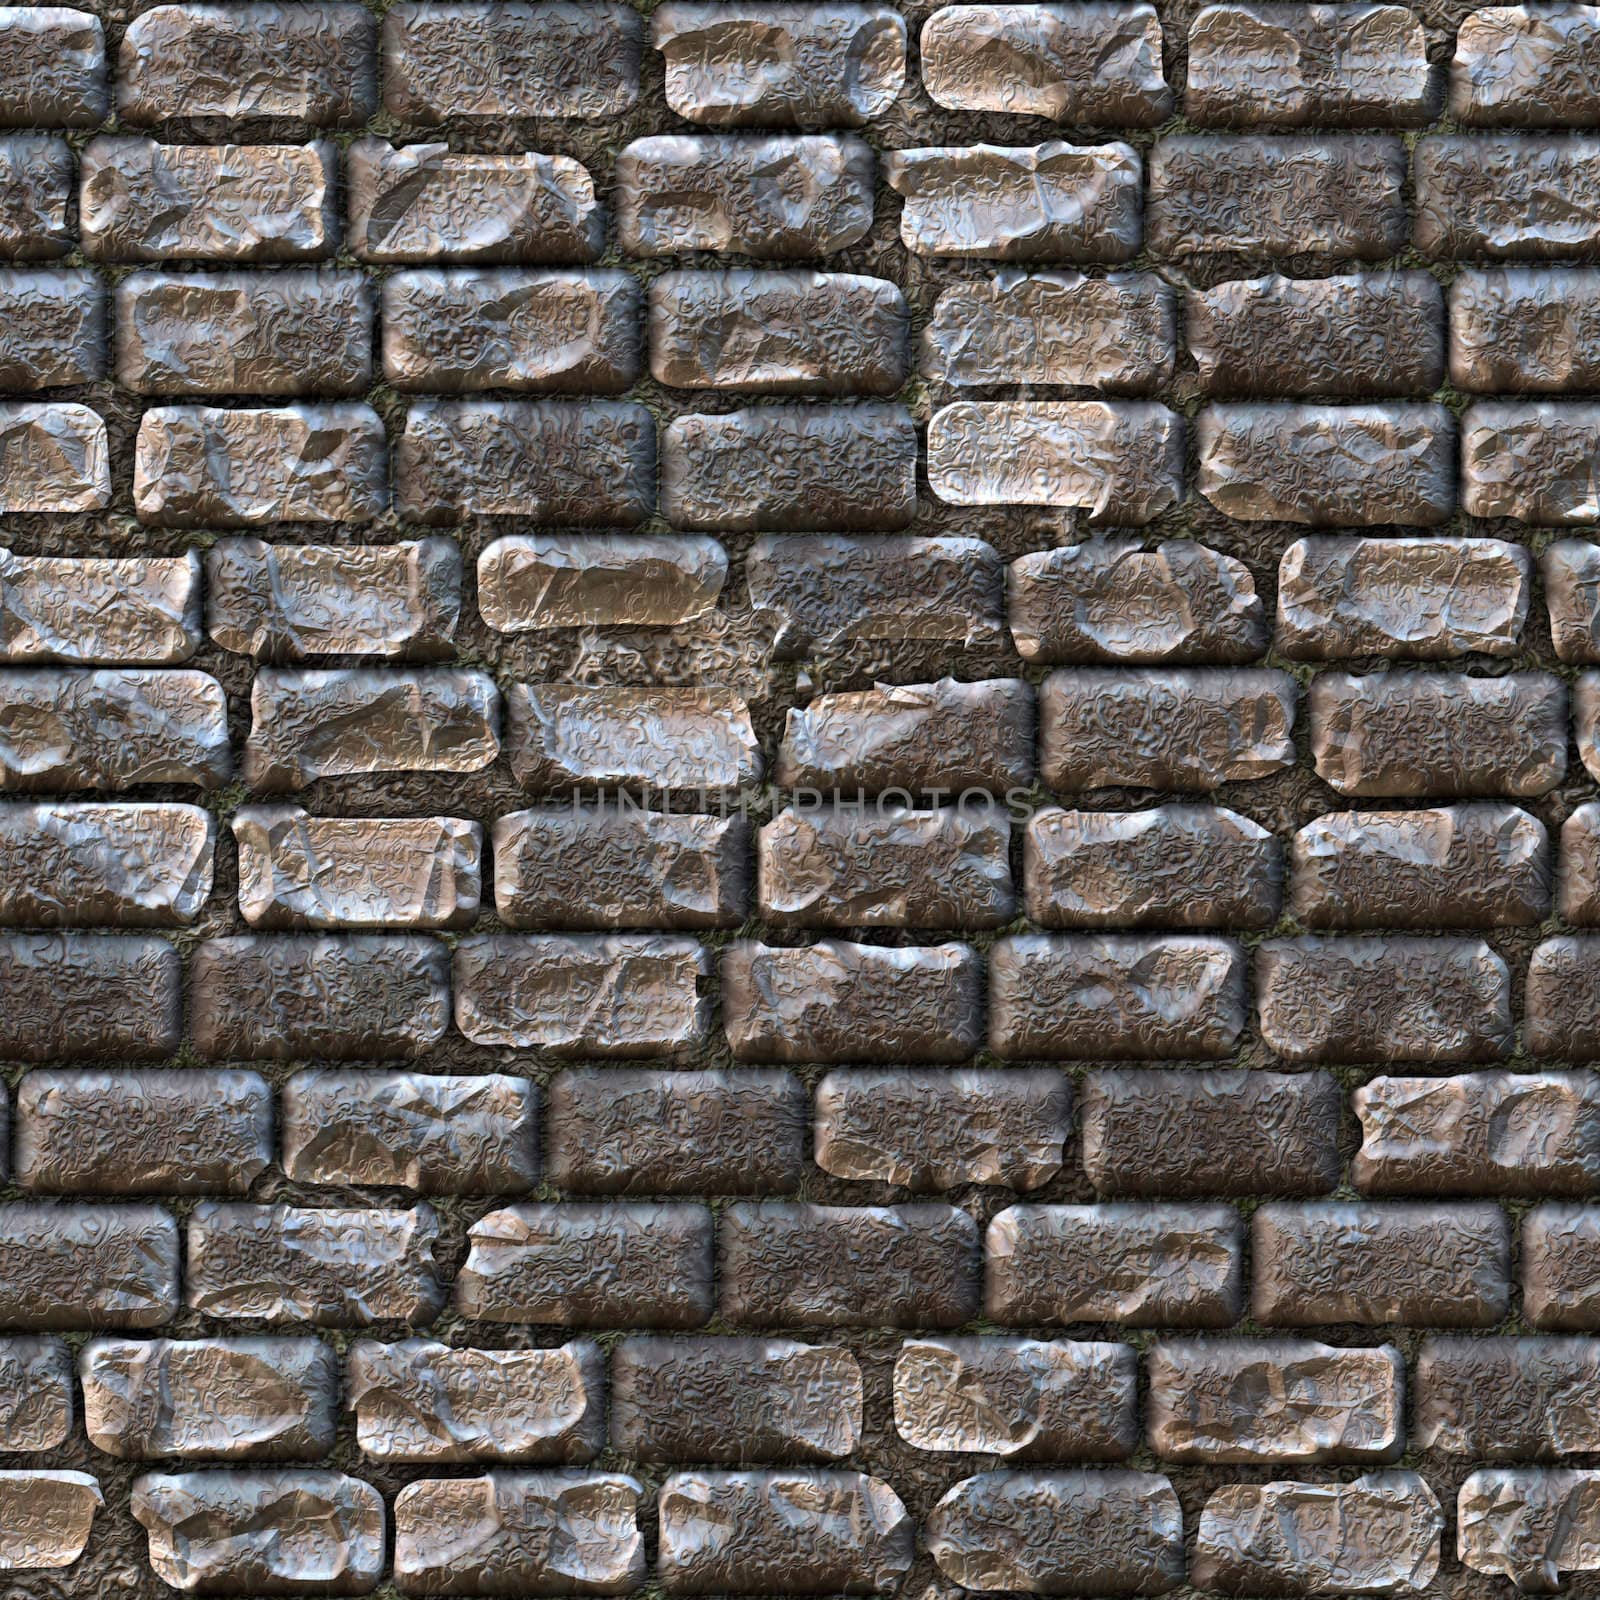 Seamless cobblestone path that works great for a a wall or stone pathway.